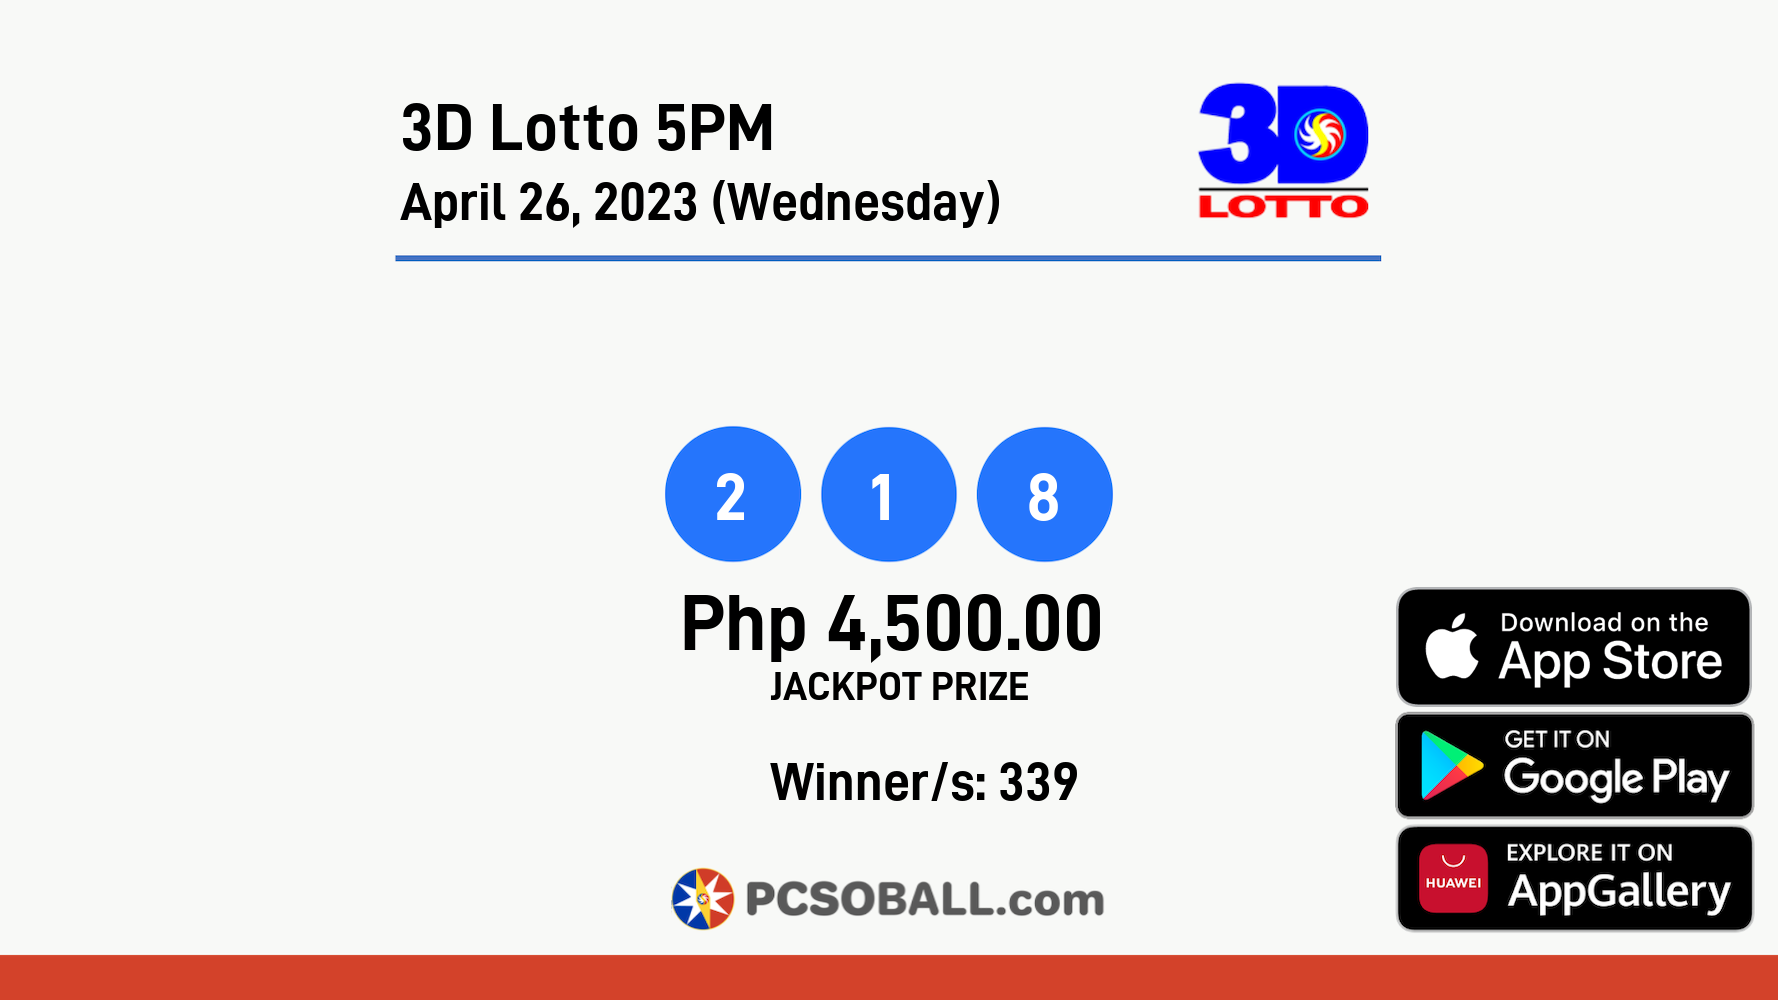 3D Lotto 5PM April 26, 2023 (Wednesday) Result